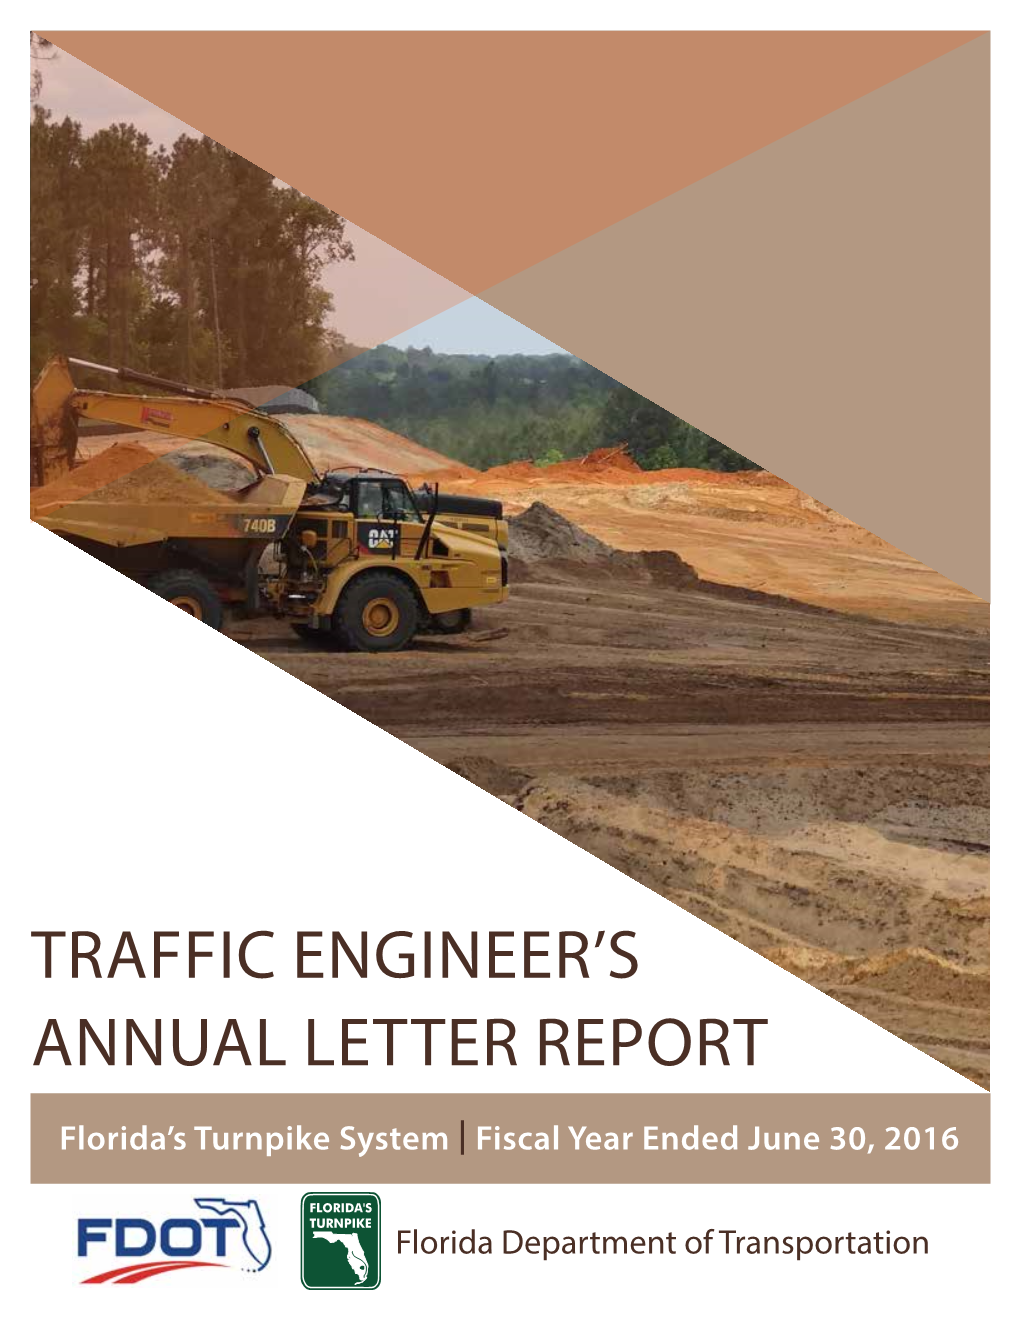 Traffic Engineer's Annual Letter Report